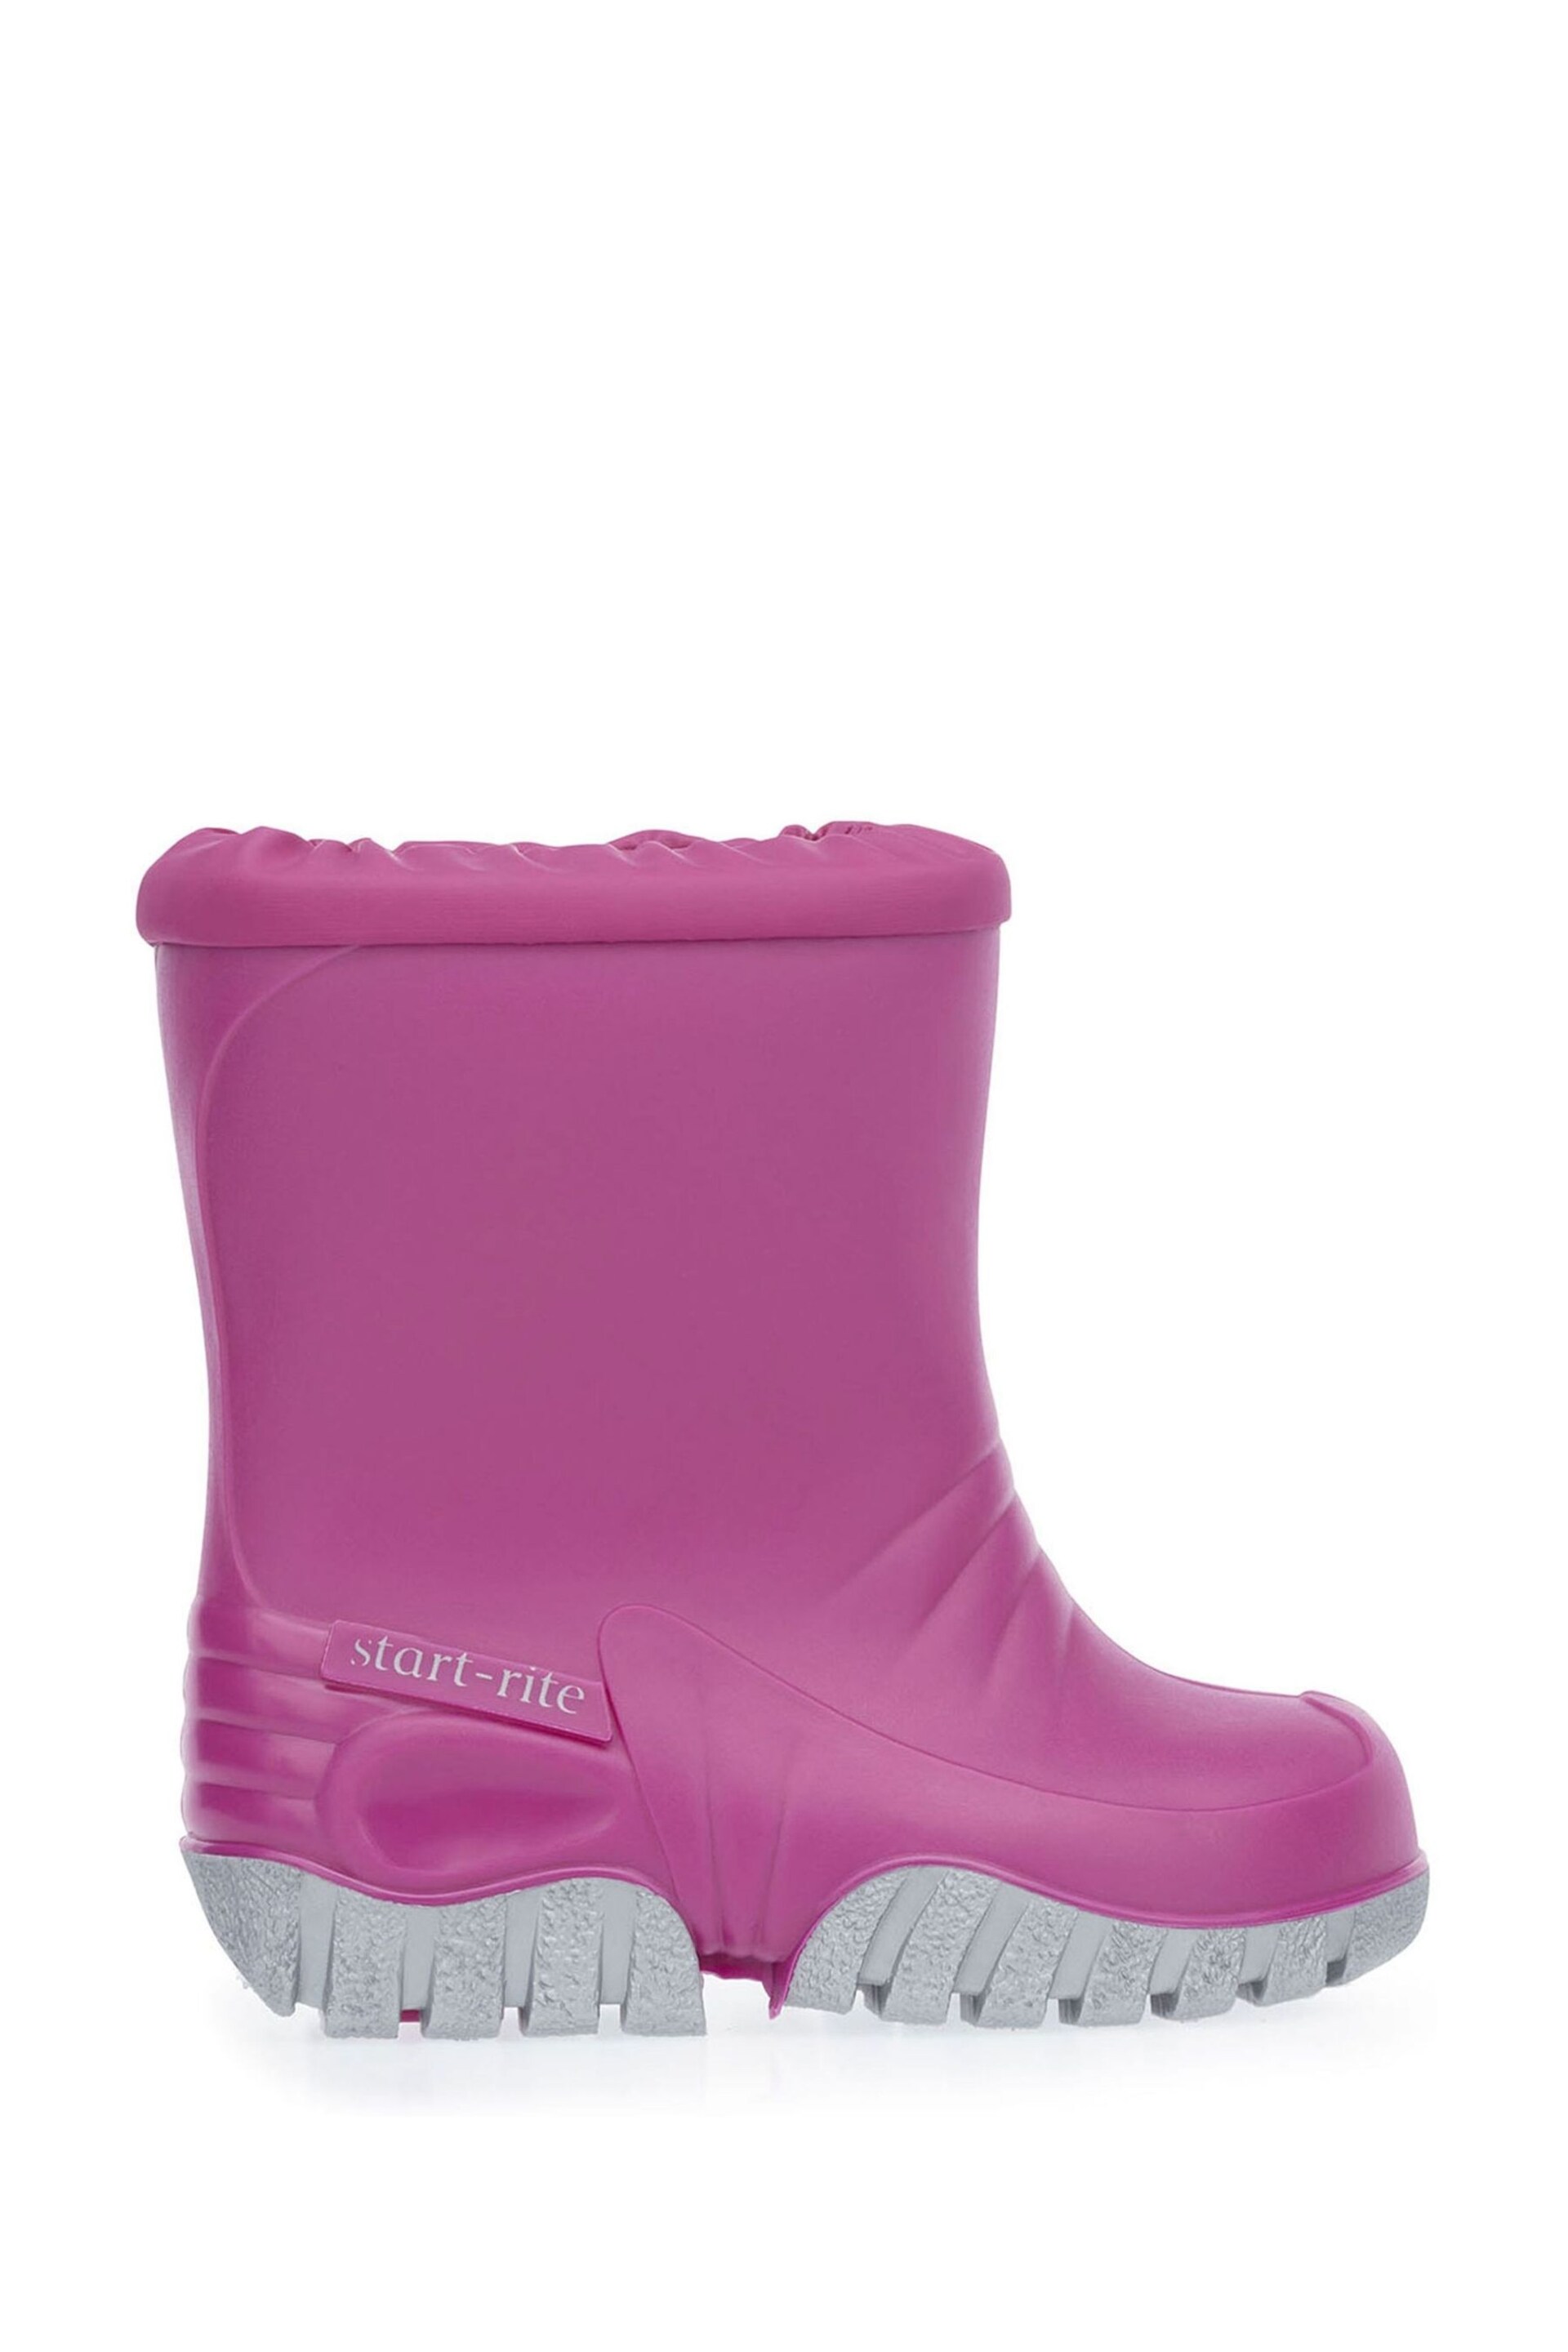 Start-Rite Baby Mudbuster Pink Cosy Lined Warm Wellies - Image 4 of 7